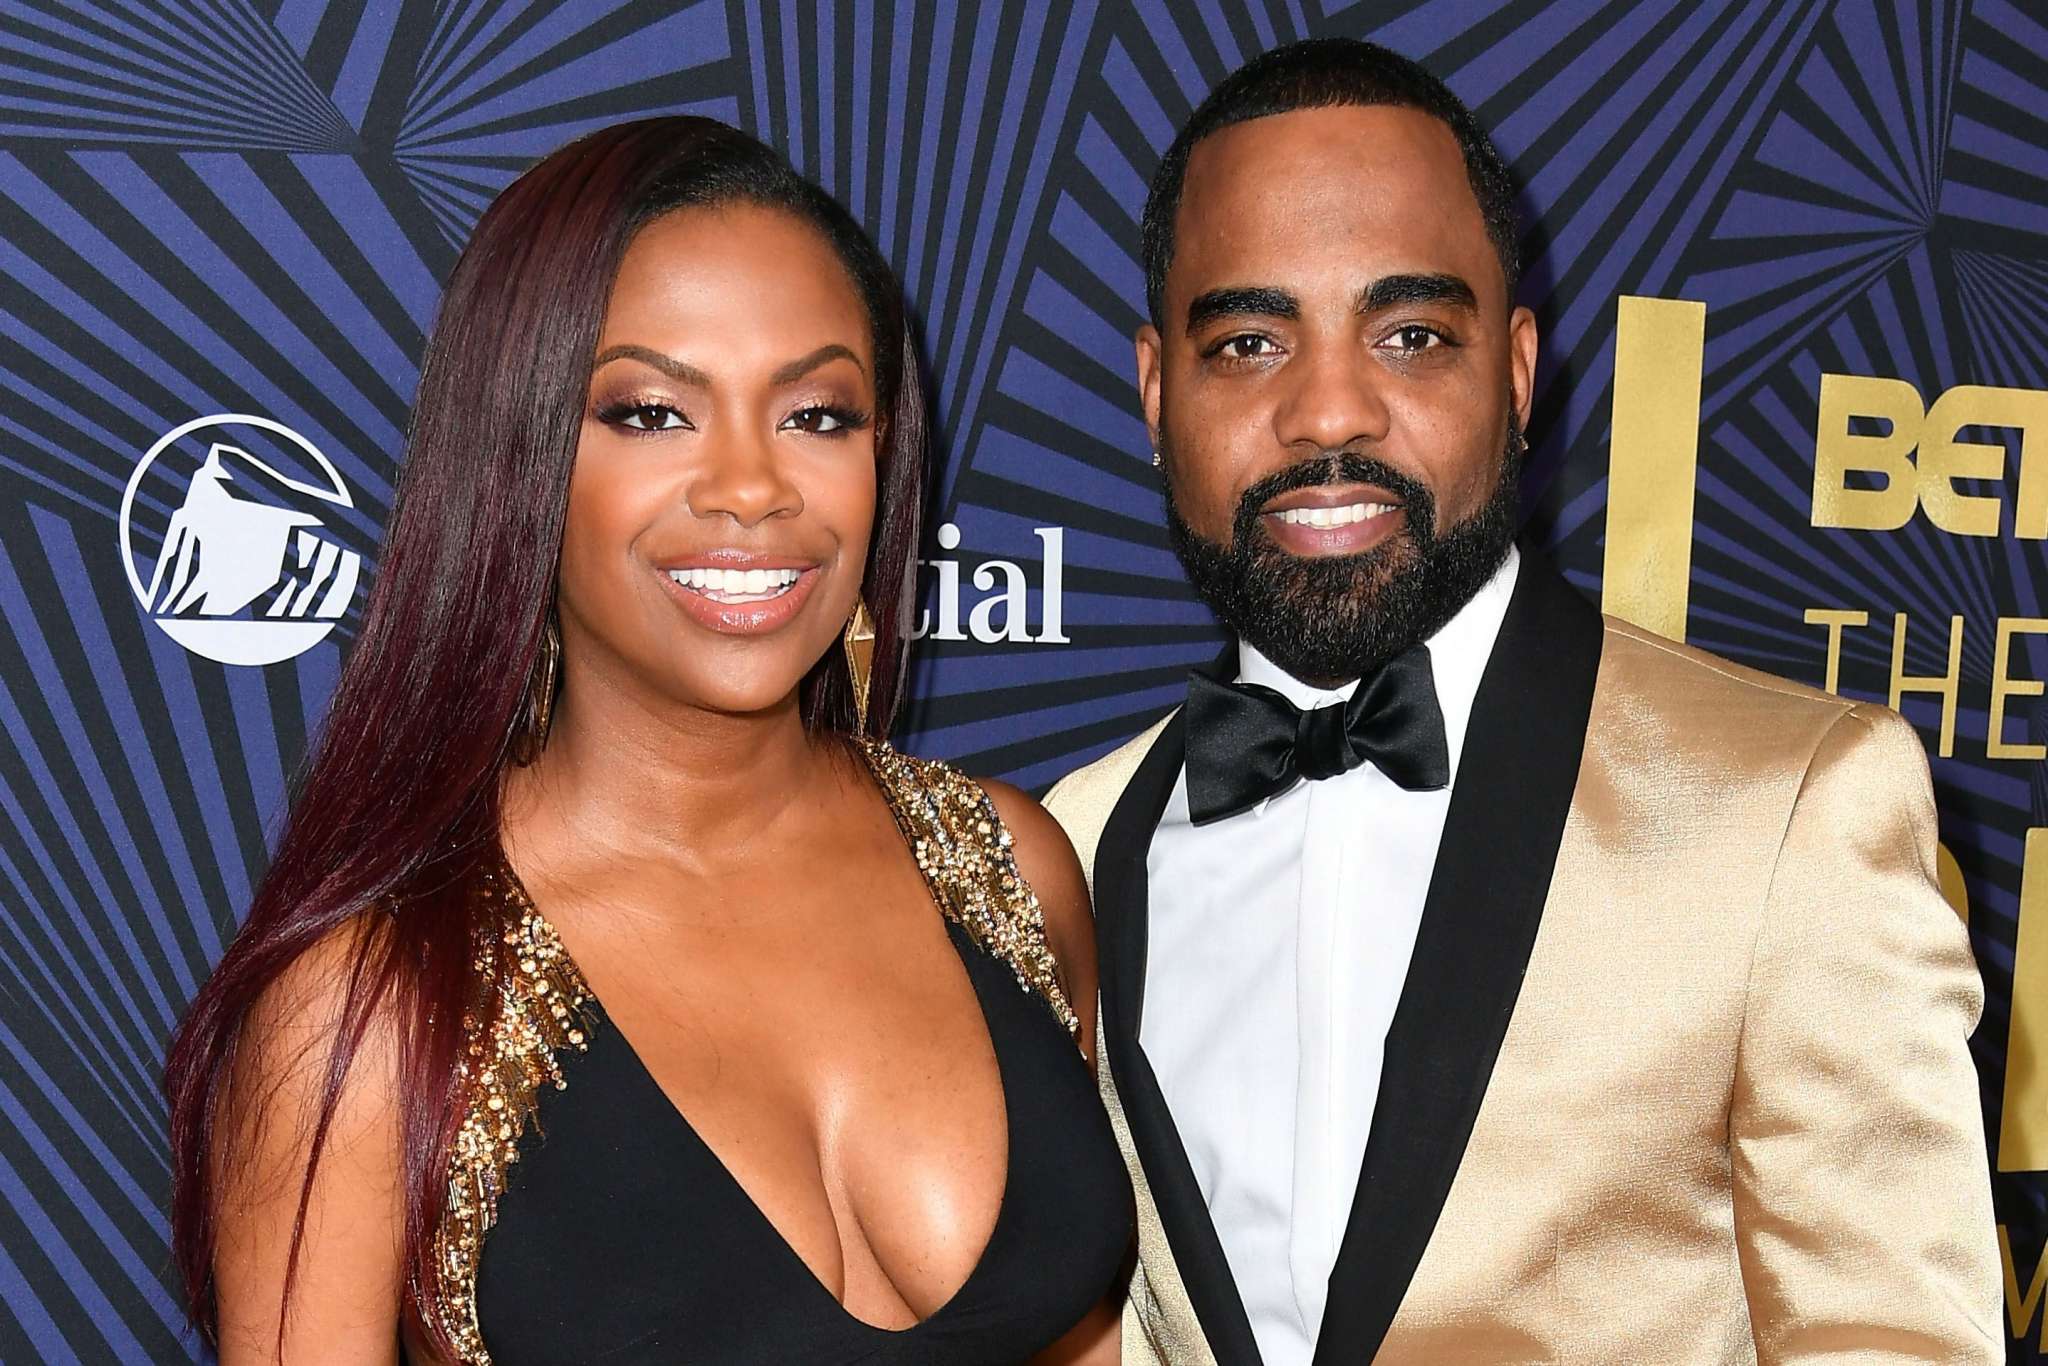 kandi-burruss-is-the-narrator-for-a-film